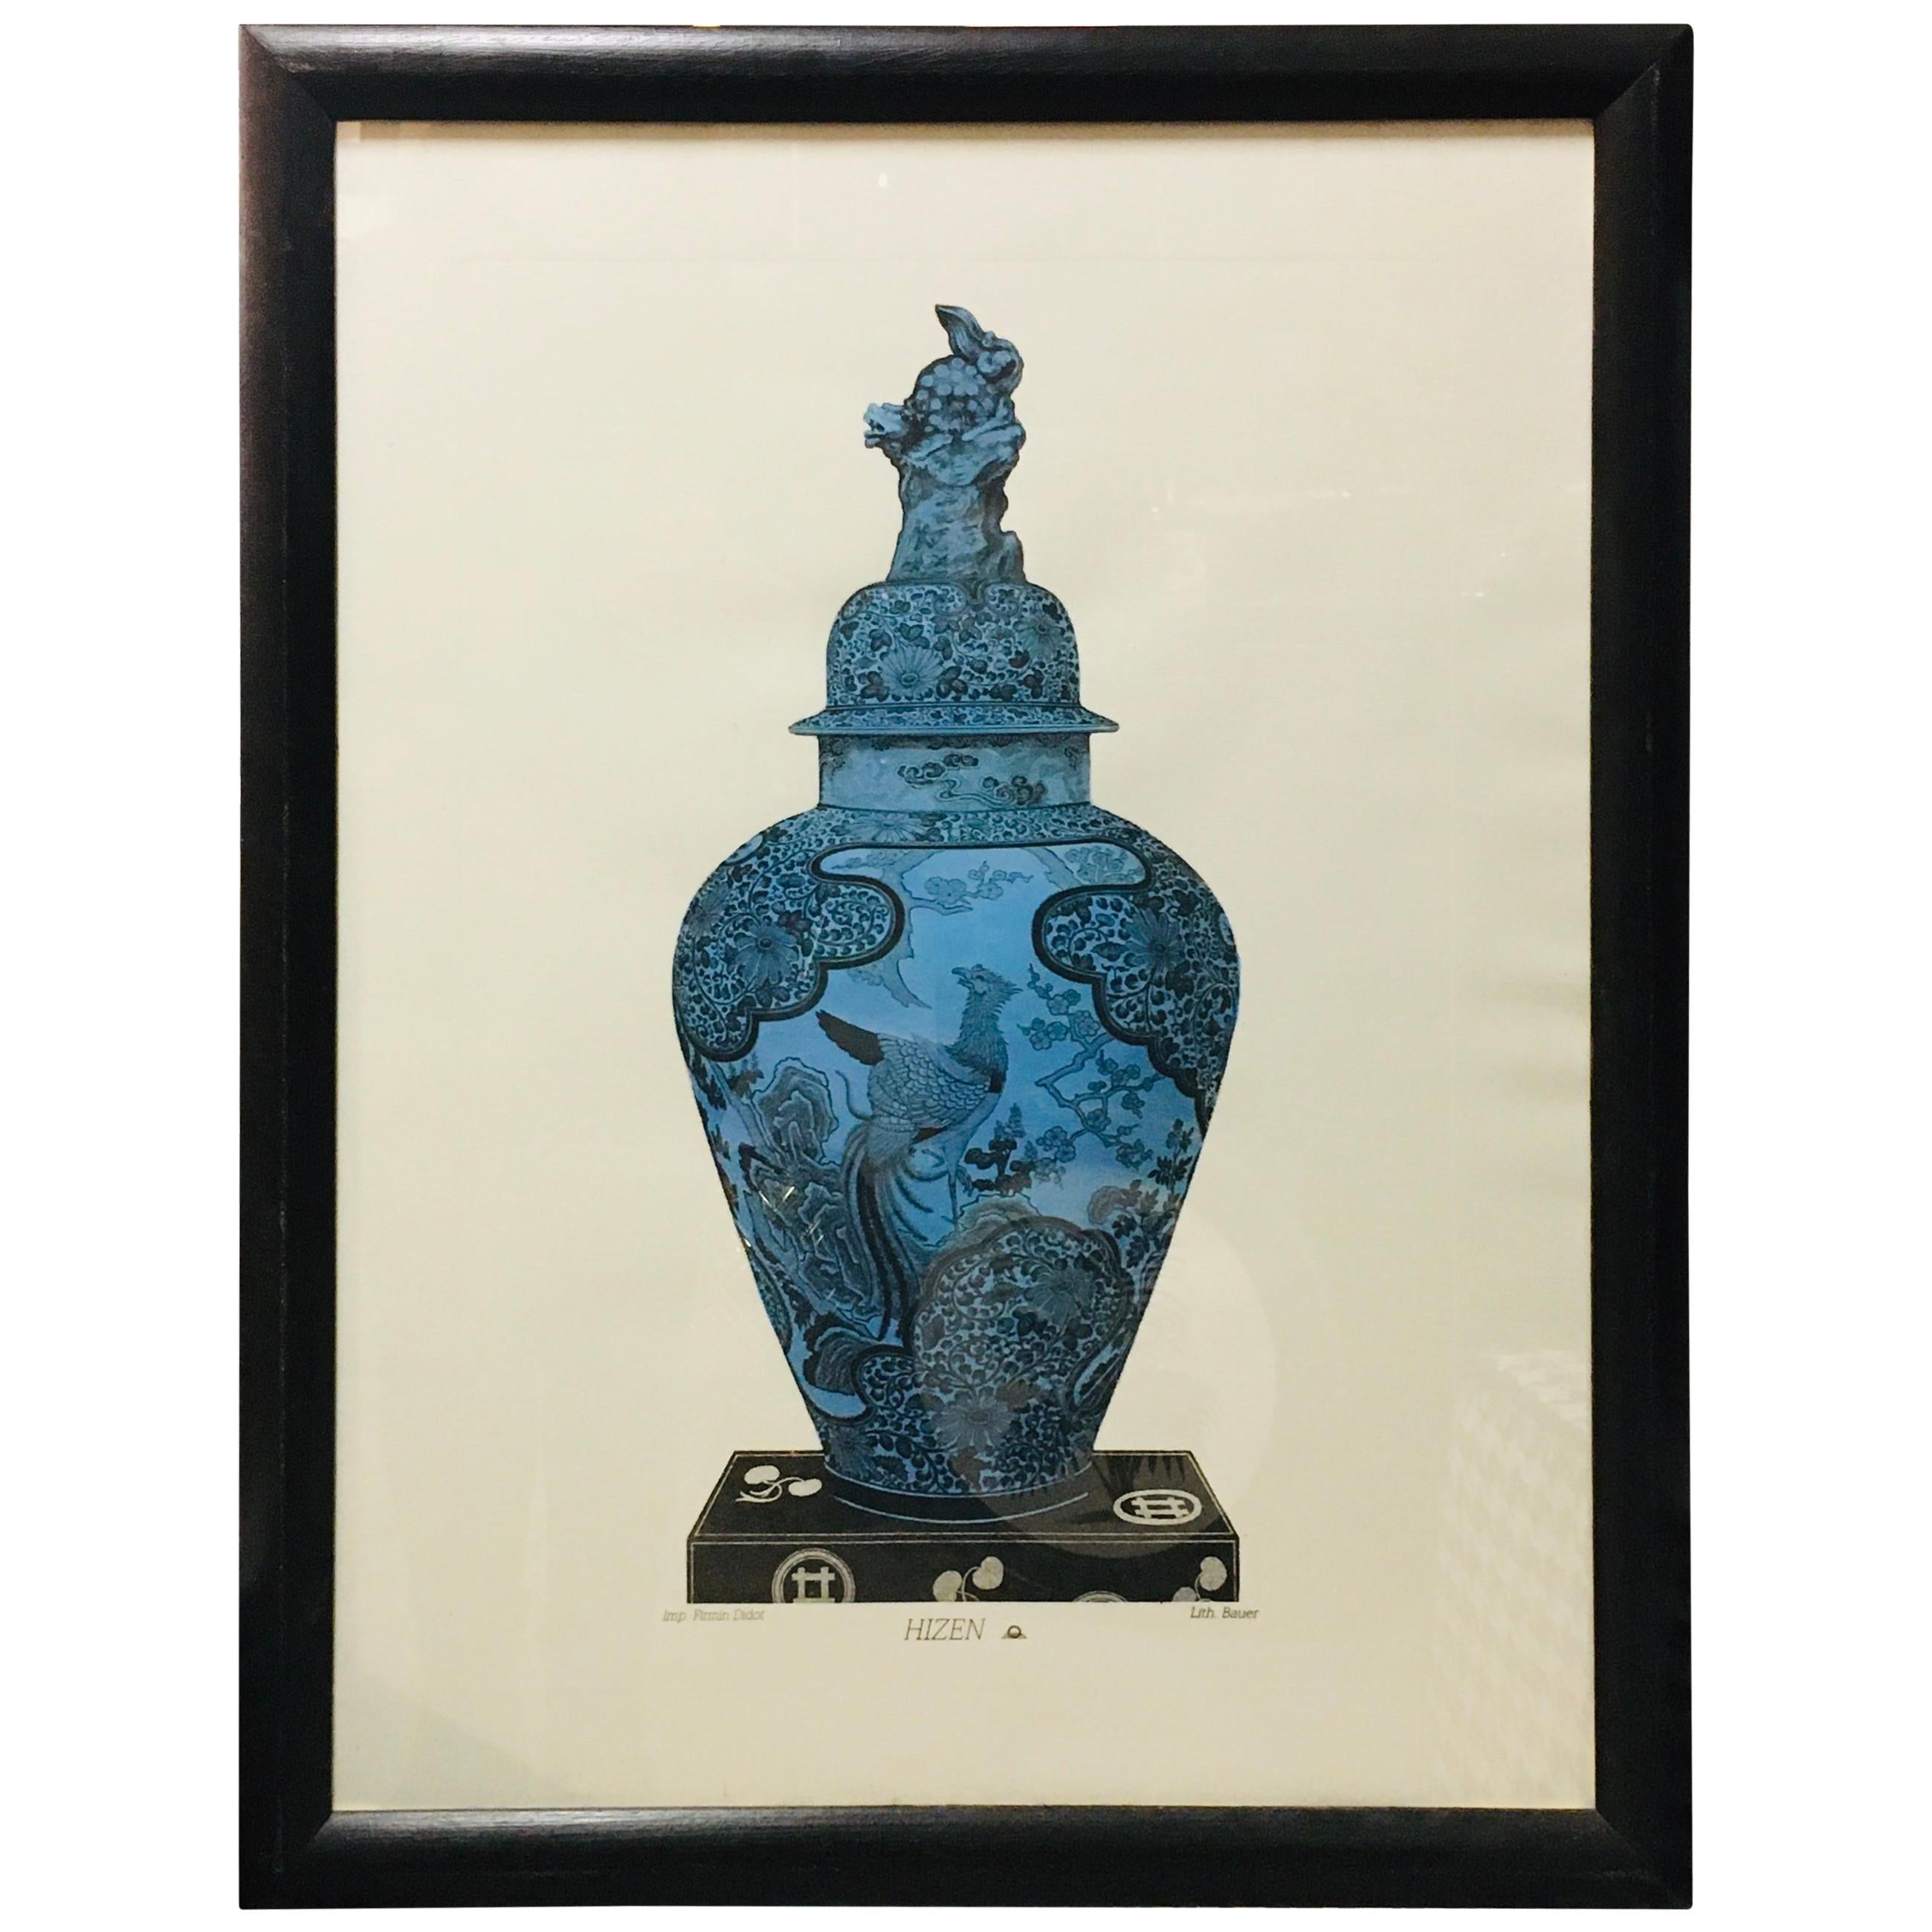  Italian Contemporary Hand Painted Blue China Vase Print with Black Frame 1 of 3 For Sale